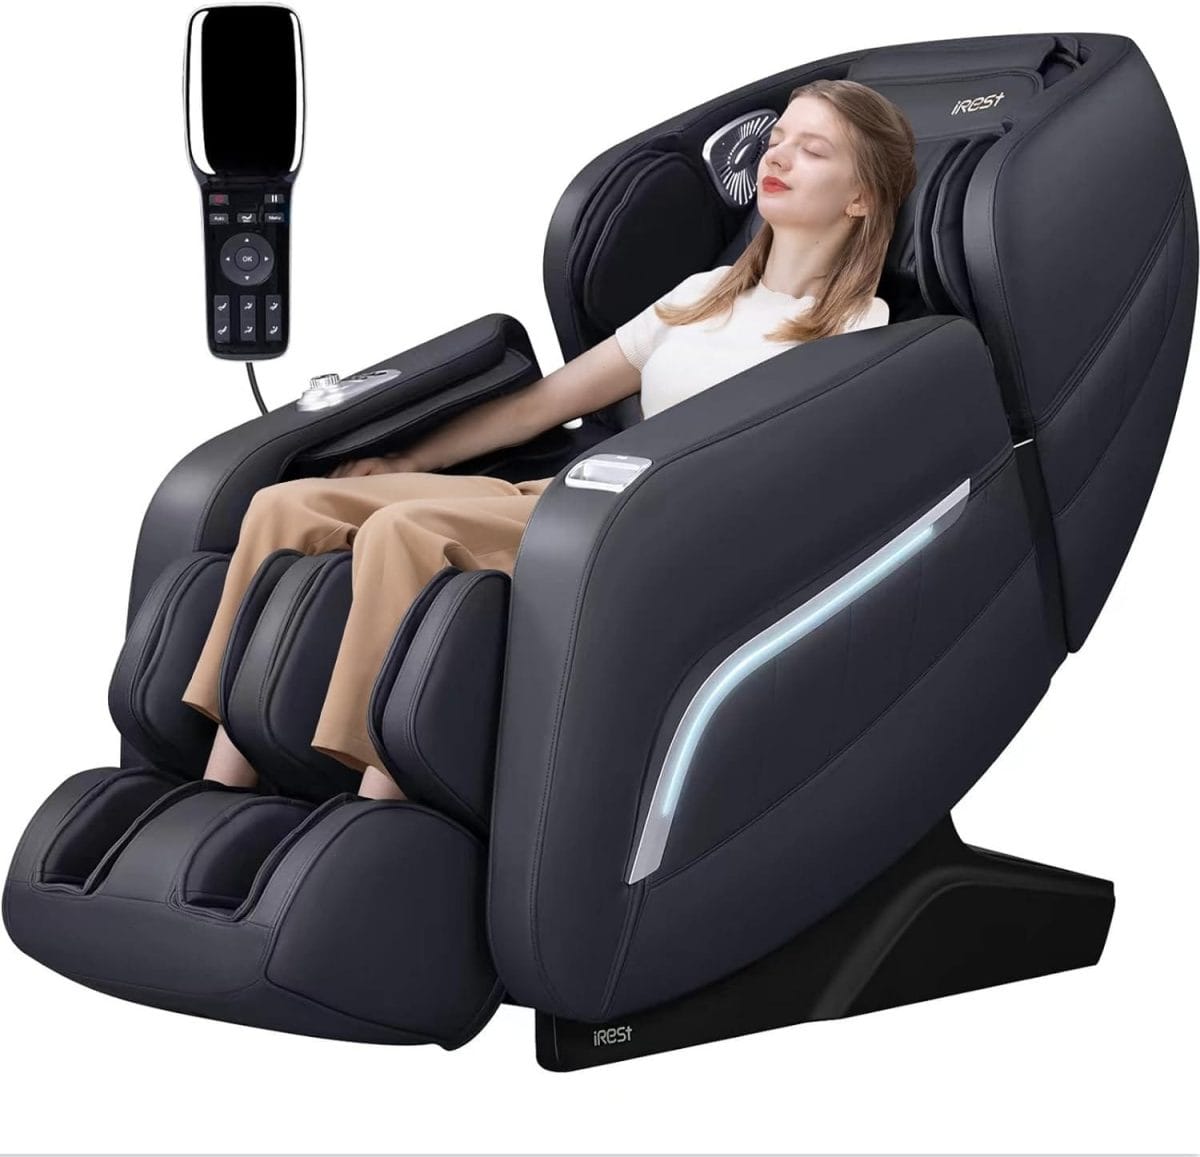 iRest 2023 Massage Chair, Full Body Zero Gravity Recliner with AI Voice Control, SL Track, Bluetooth, Yoga Stretching, Foot Rollers, Airbags, Heating (Black)